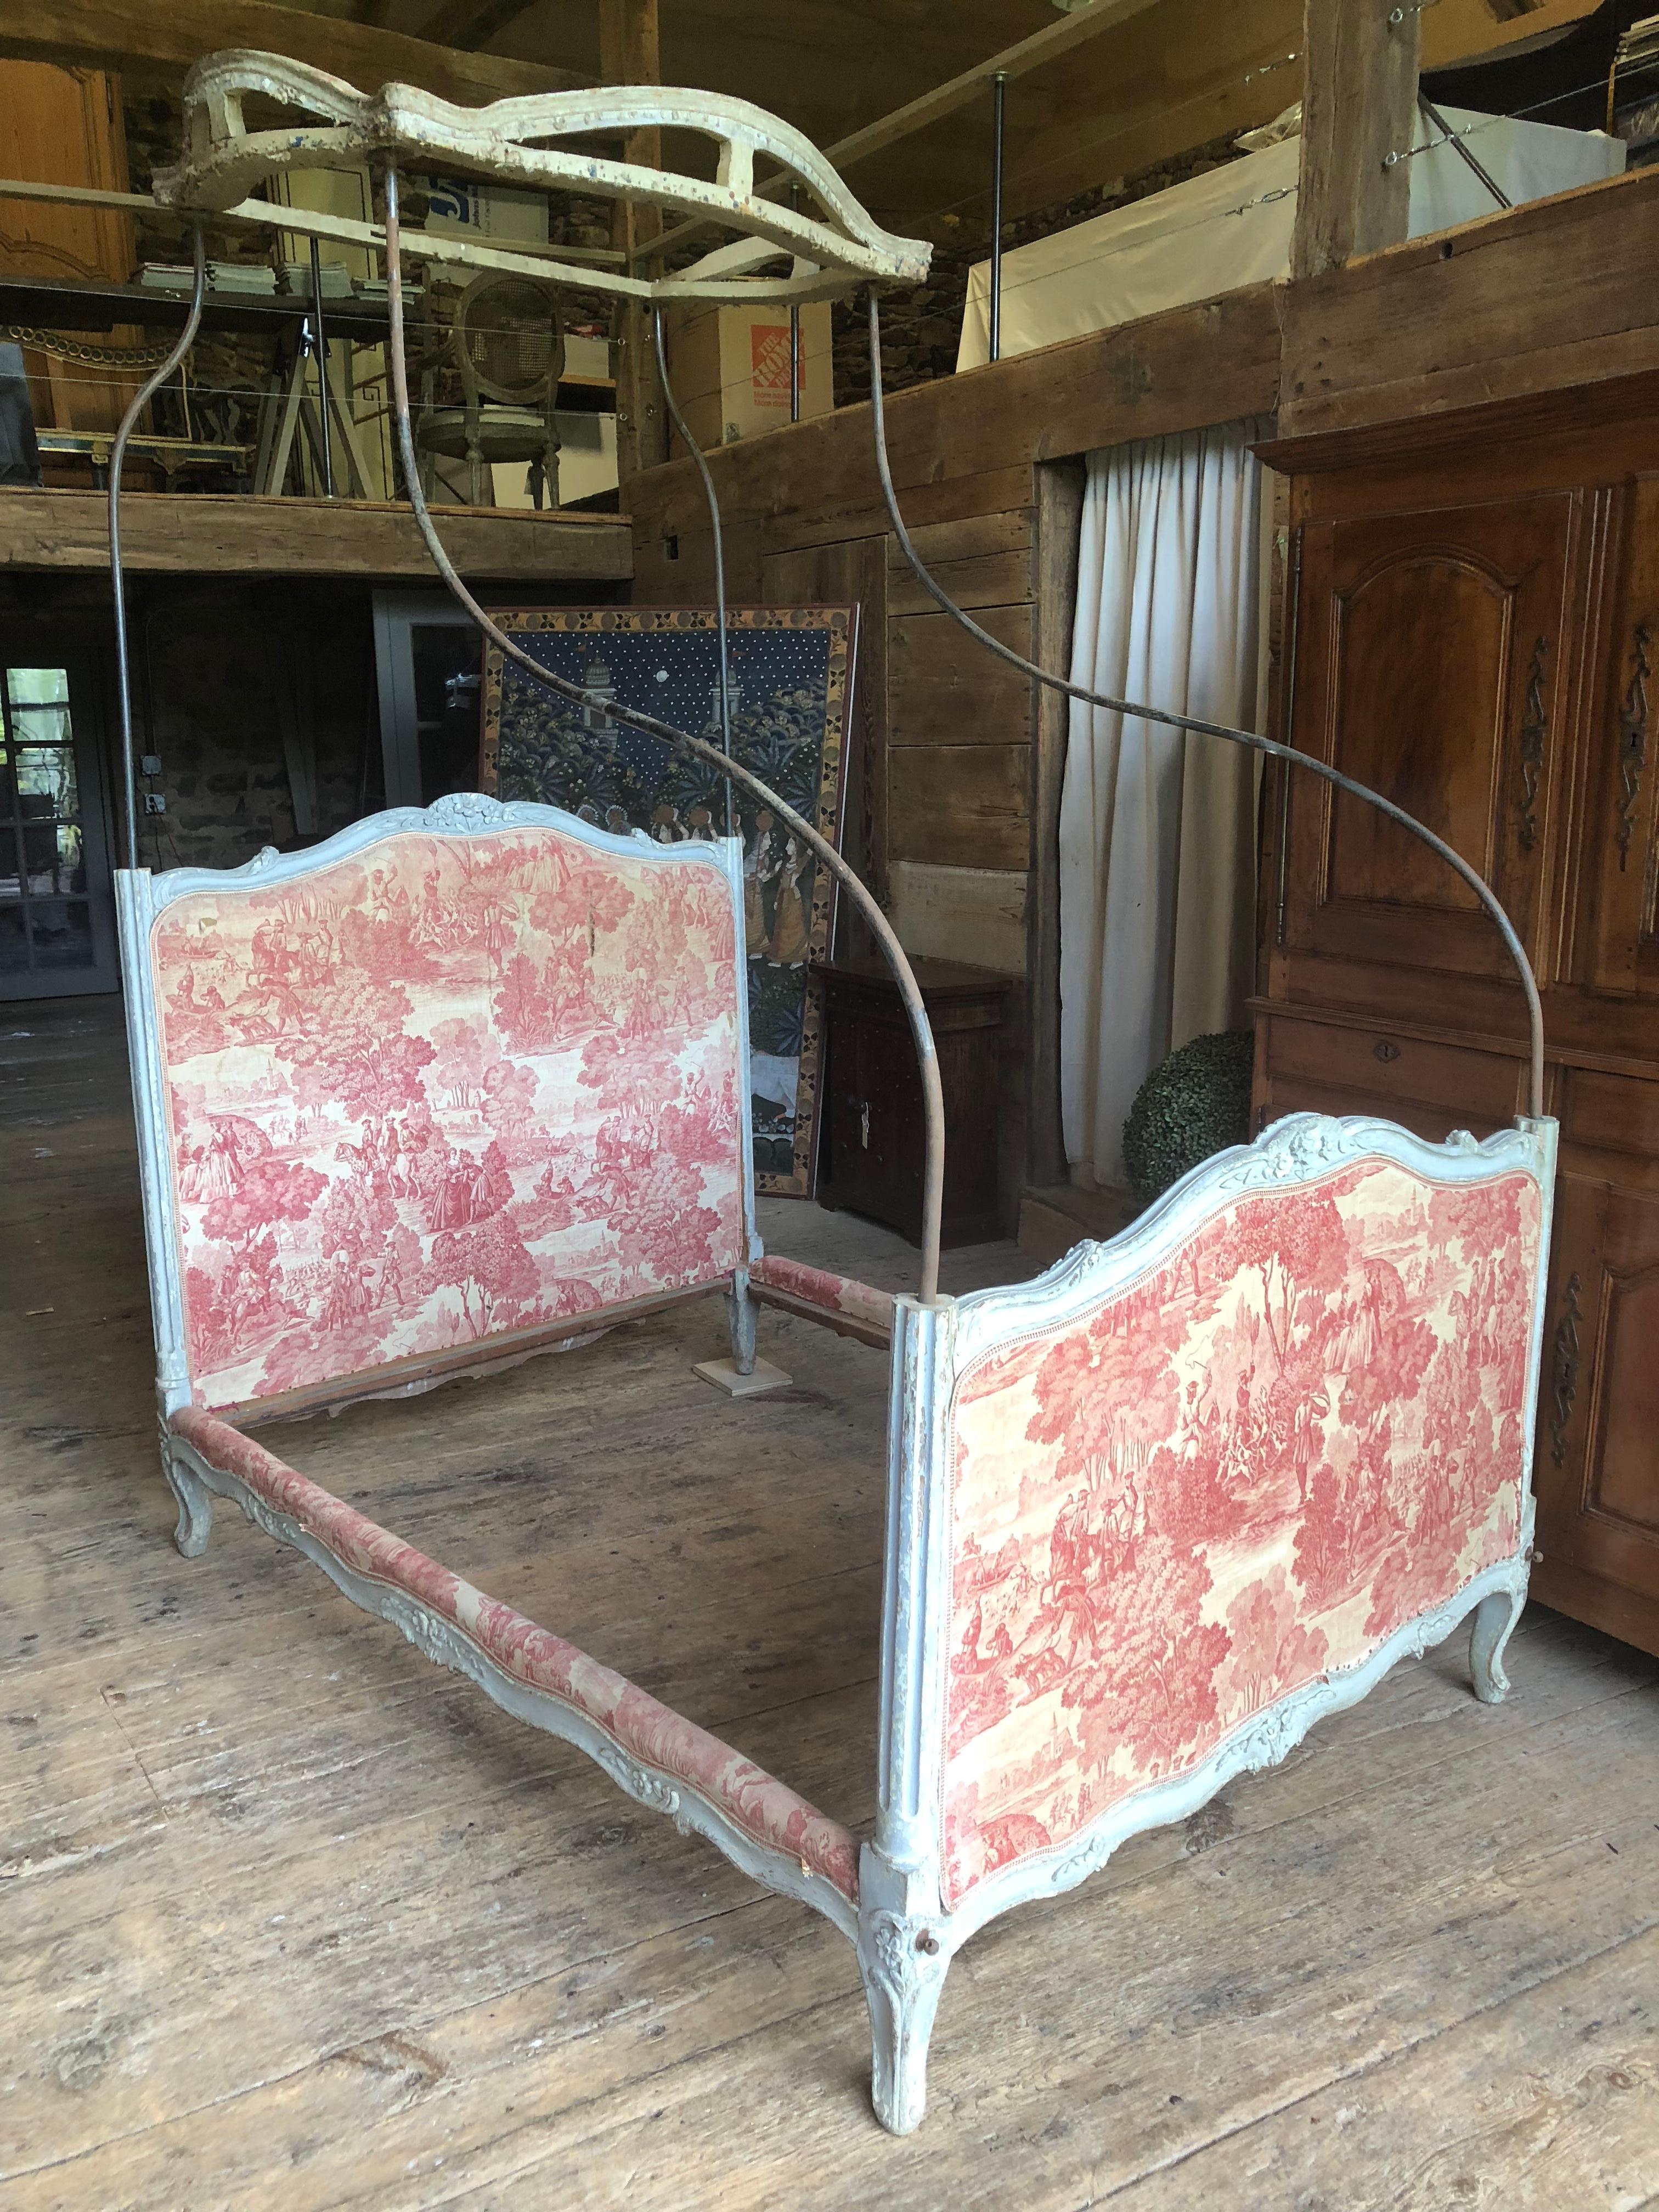 A rare 18th century Louis XV/ XVI transitional canopy bed, the crown supported by four upright curved iron rods mounted into the nicely carved grey painted frame, partially upholstered in period Toile de Jouy fabric. The bed is from the estate of